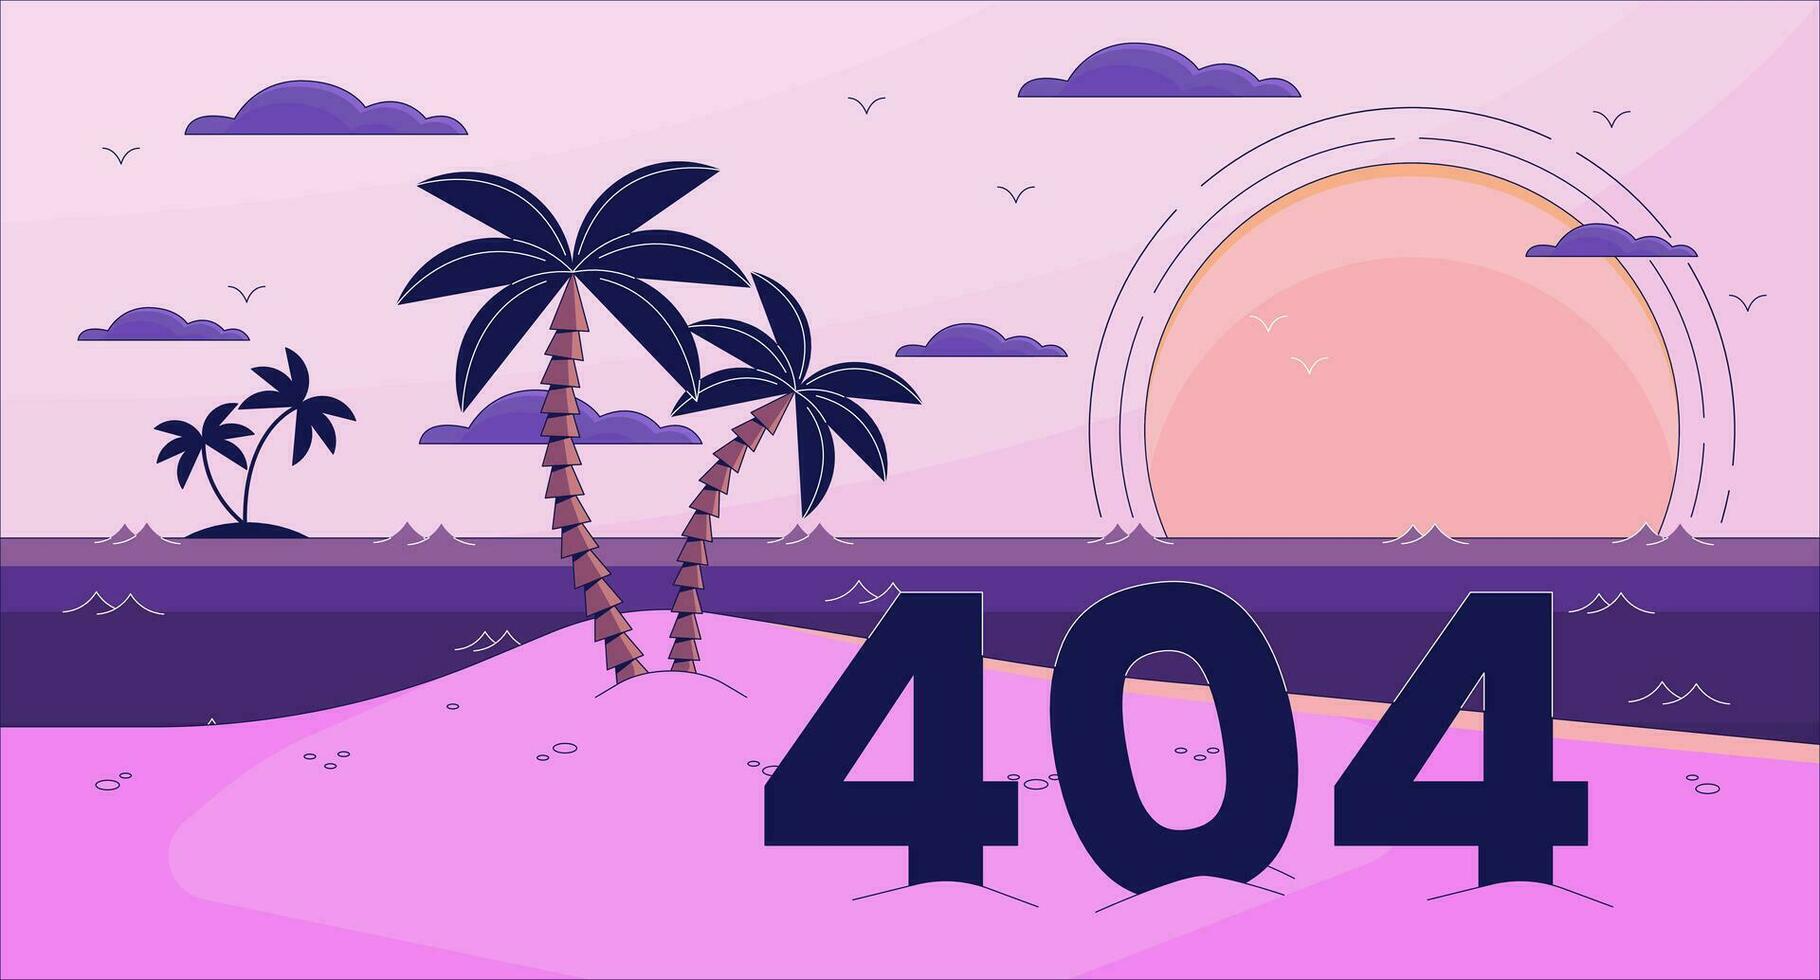 Bay paradise error 404 flash message. Palm trees on island. Website landing page ui design. Not found cartoon image, dreamy vibes. Vector flat illustration concept with 90s retro background